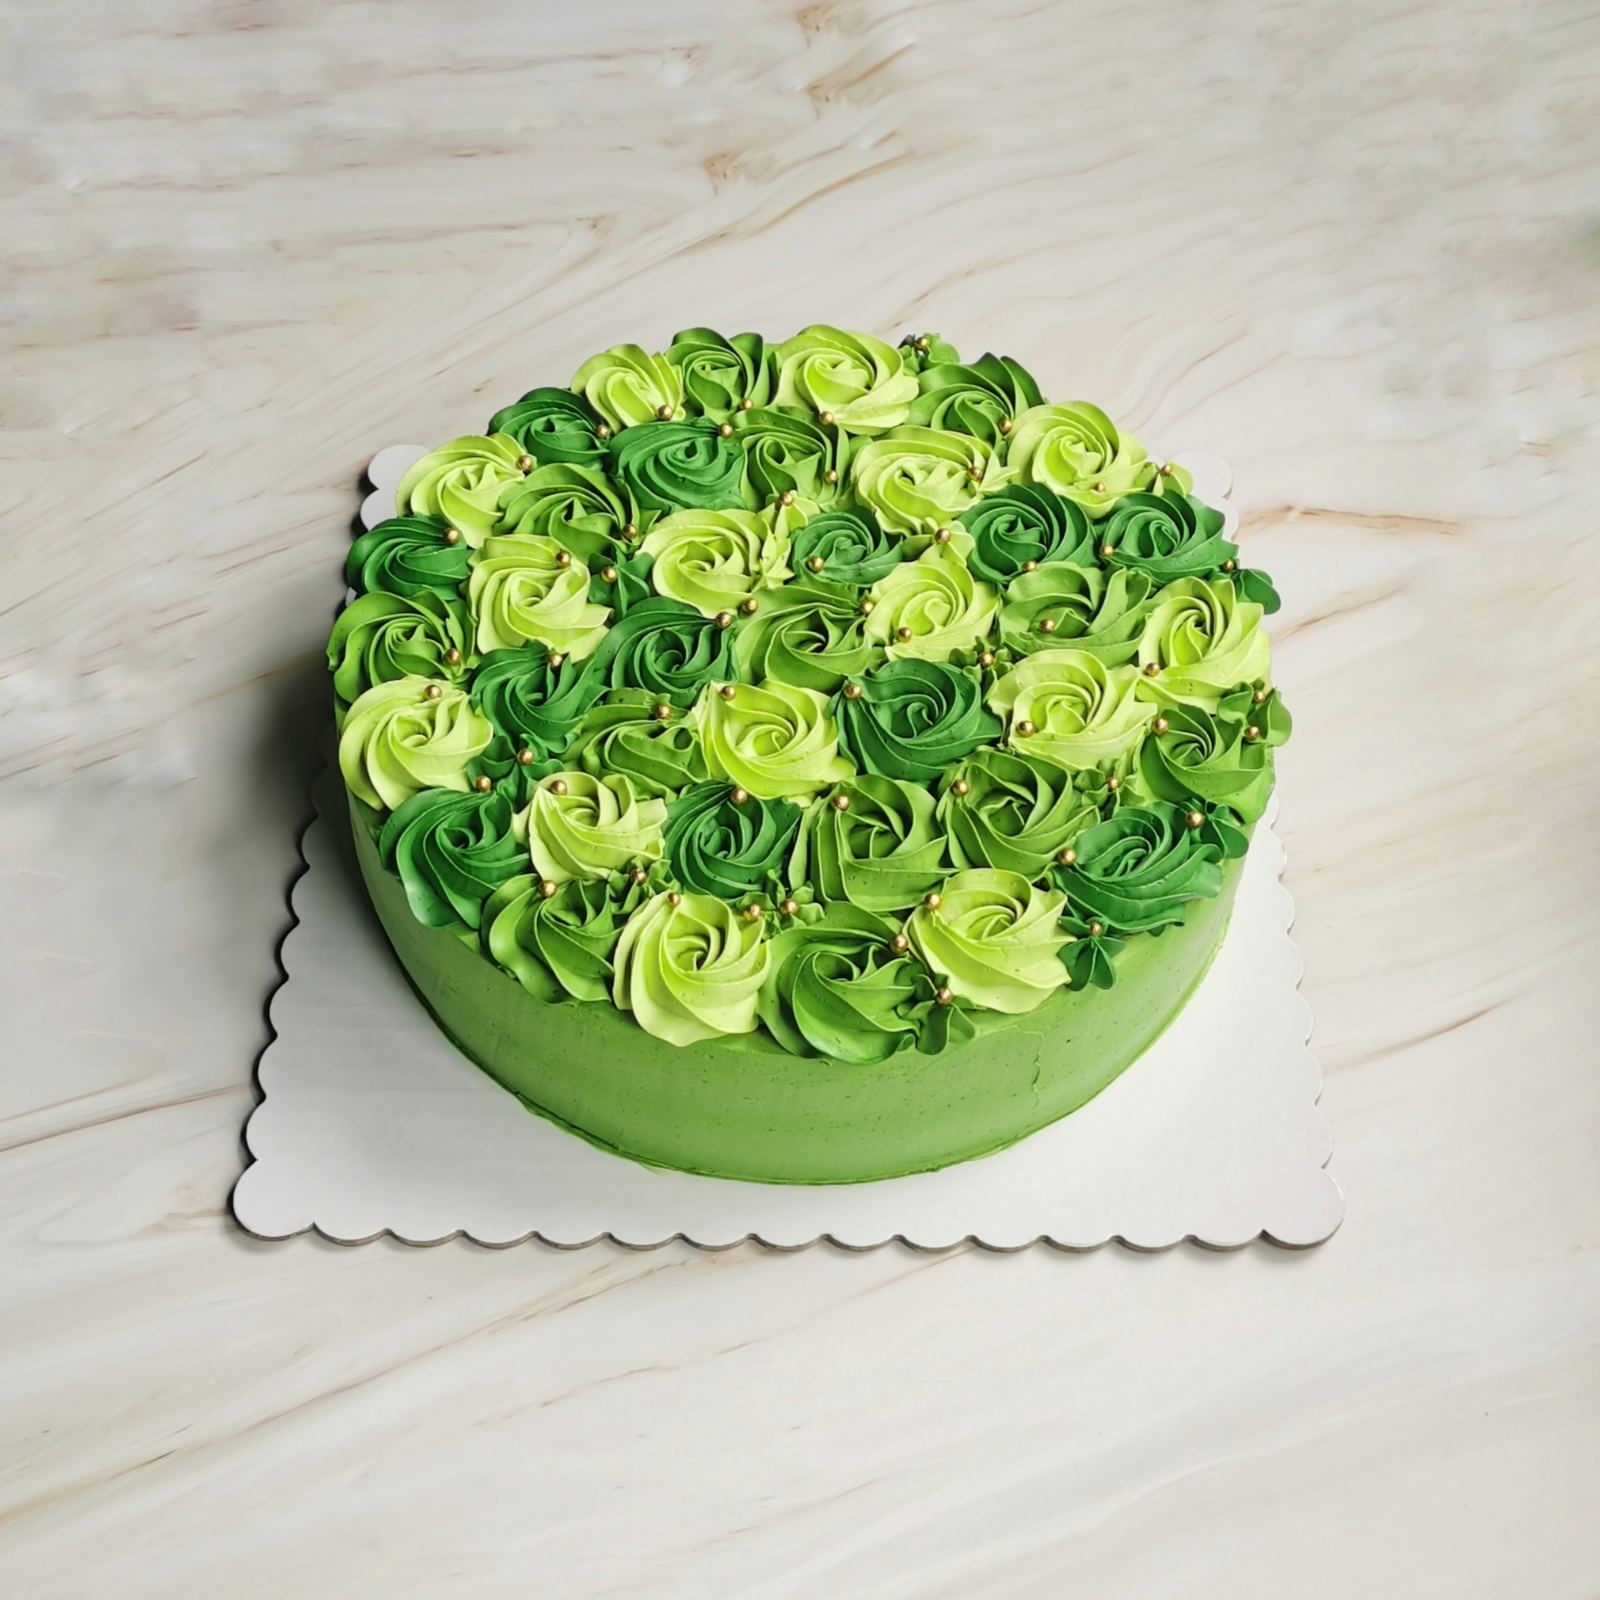 10 Gorgeously Green Cakes | The Cake Blog